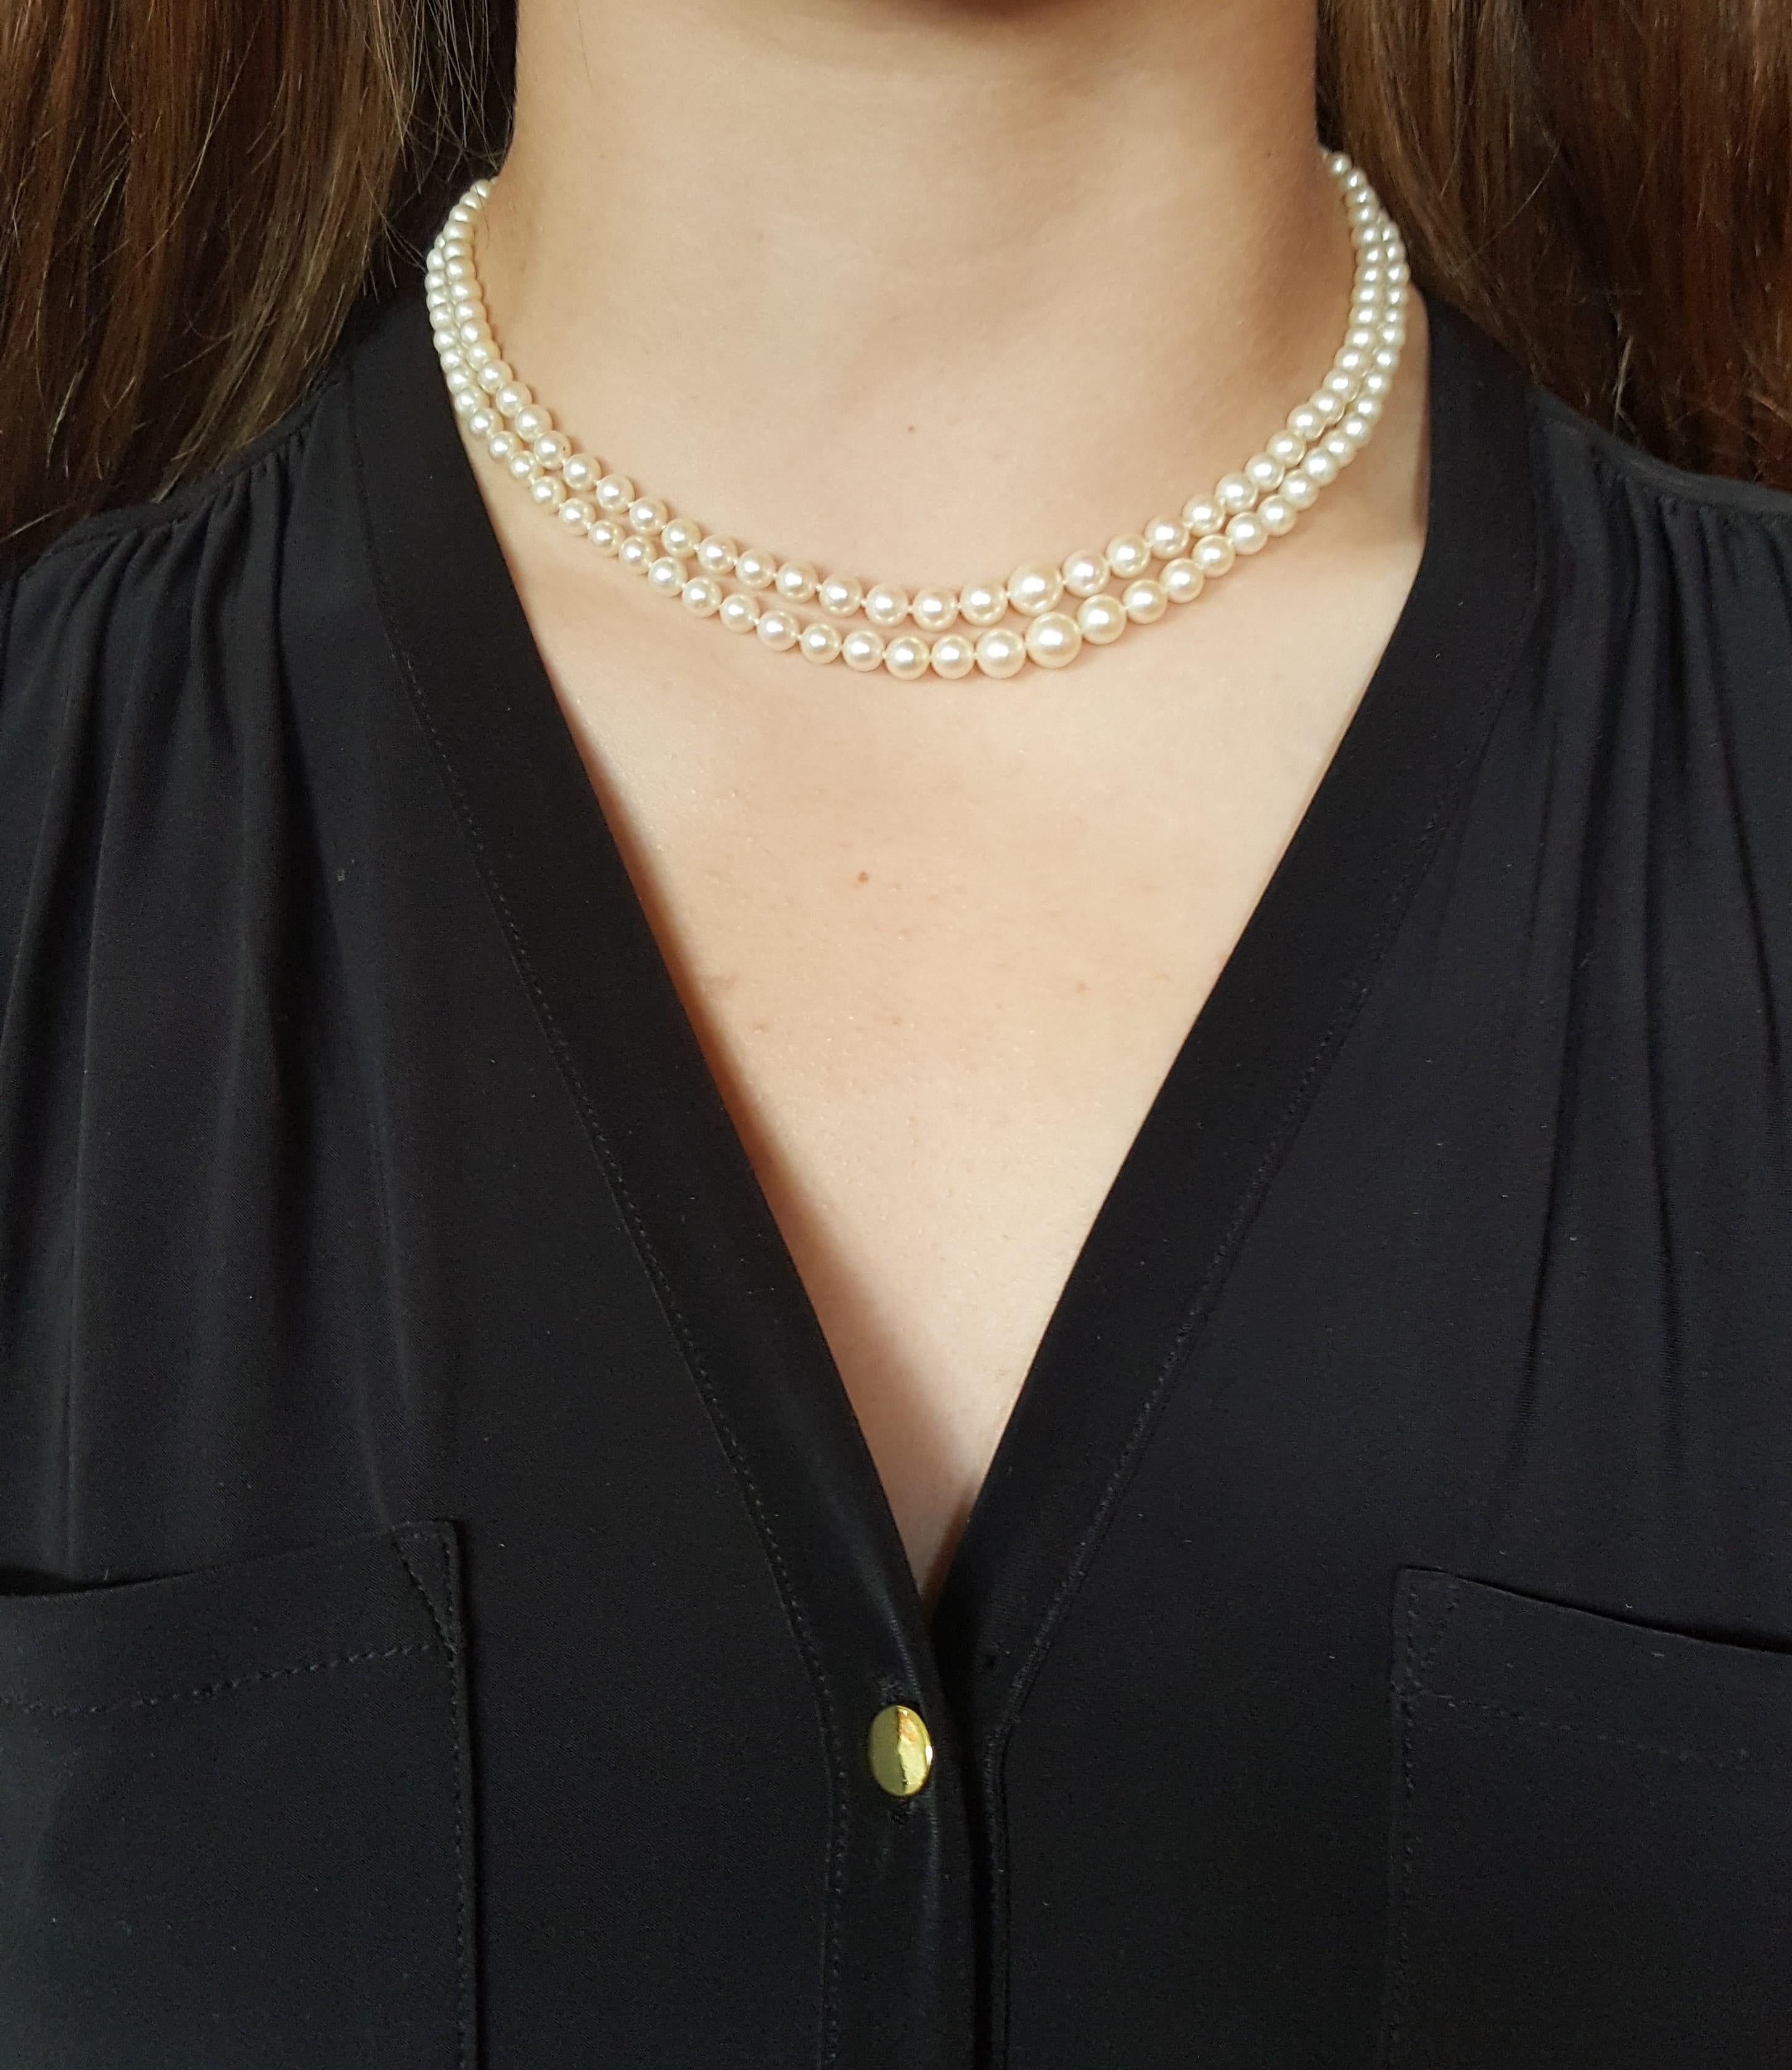 Vintage double strand white cultured pearl necklace, graduating in size from 7mm to 3.8mm. The pearls range in size from 16.5 inches to 17.5 inches secured with a 14kt white gold clasp. This pearl necklace is timeless and makes a perfect addition to